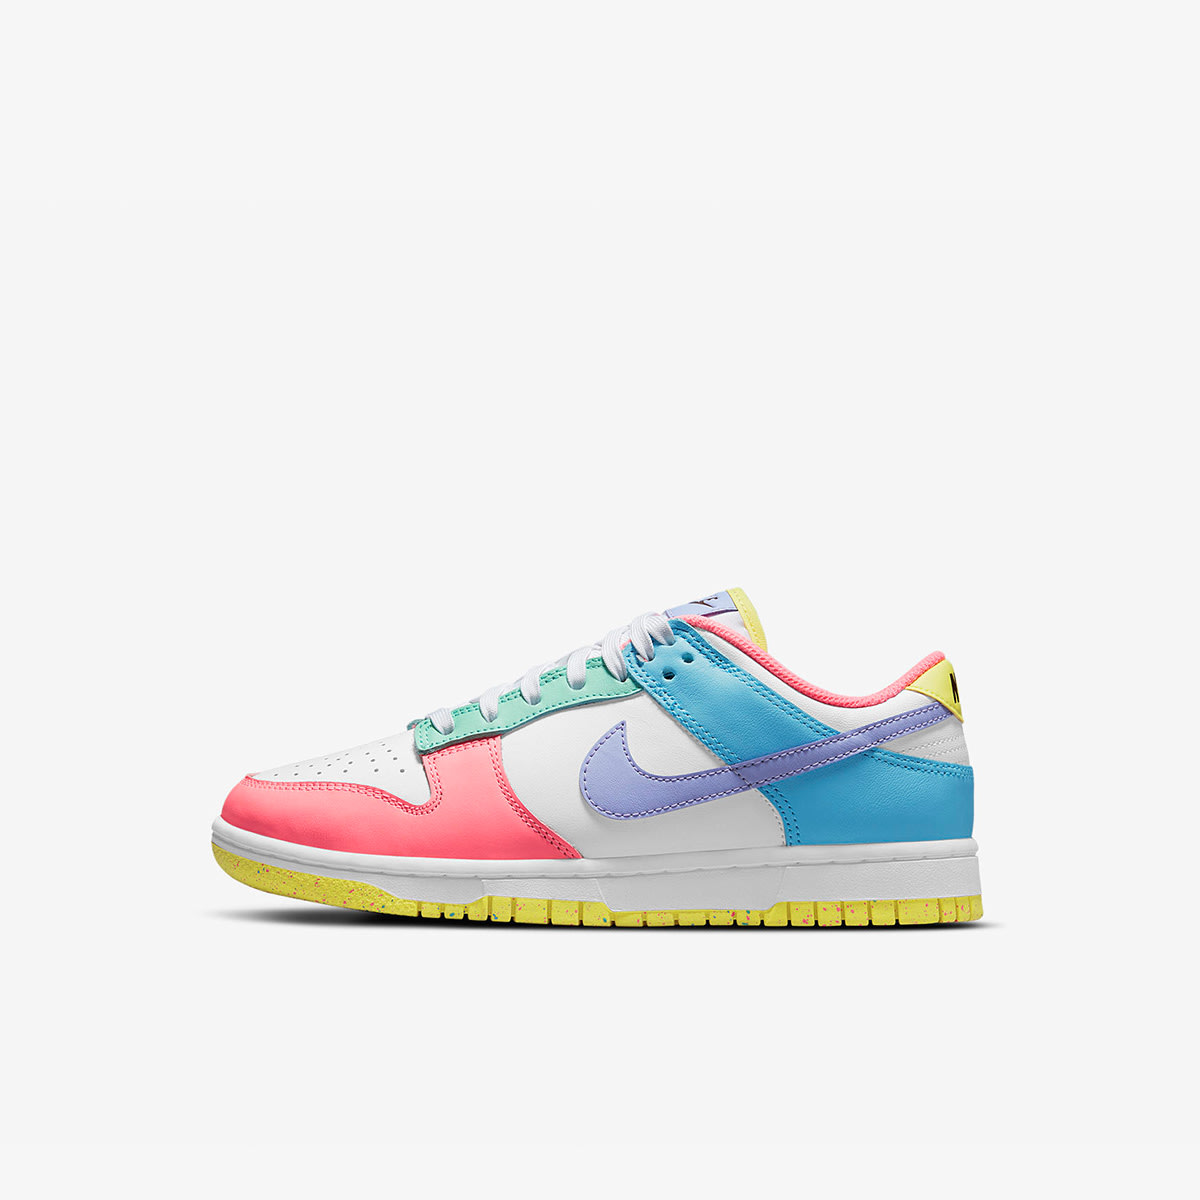 Nike Dunk Low SE W (White, Green, Sunset & Lagoon) | END. Launches